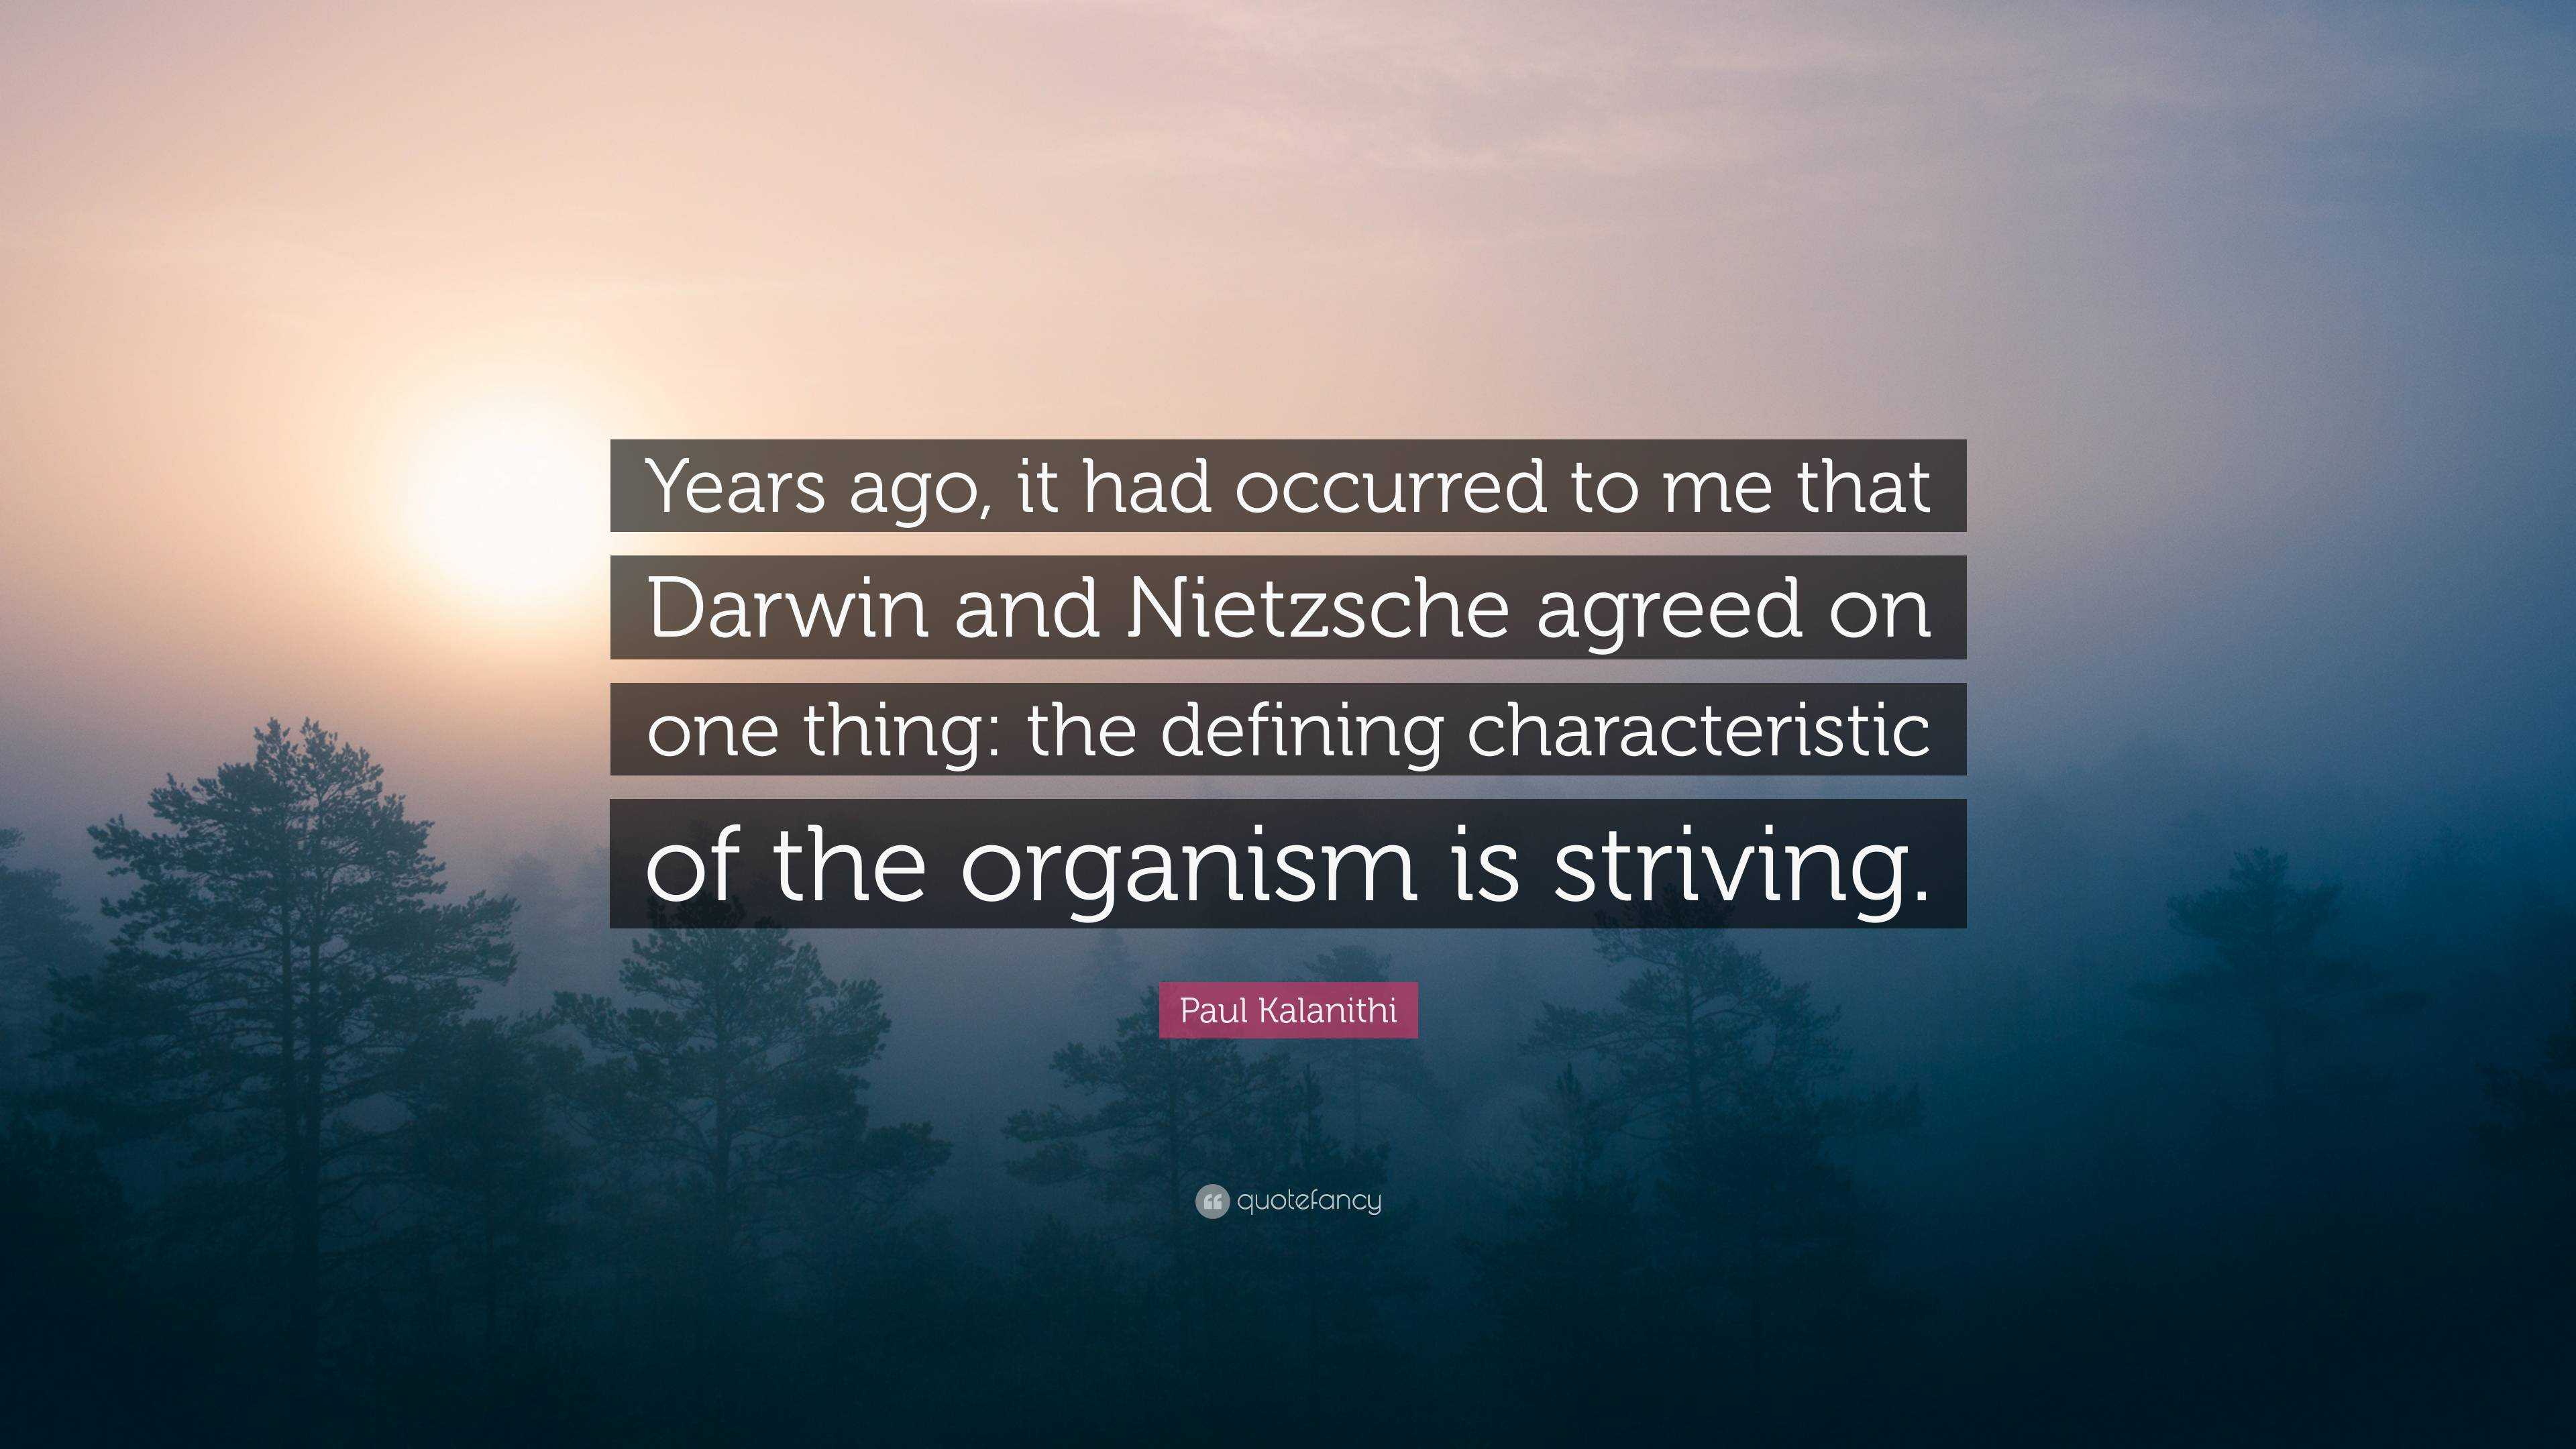 Paul Kalanithi Quote: “Years ago, it had occurred to me that Darwin and